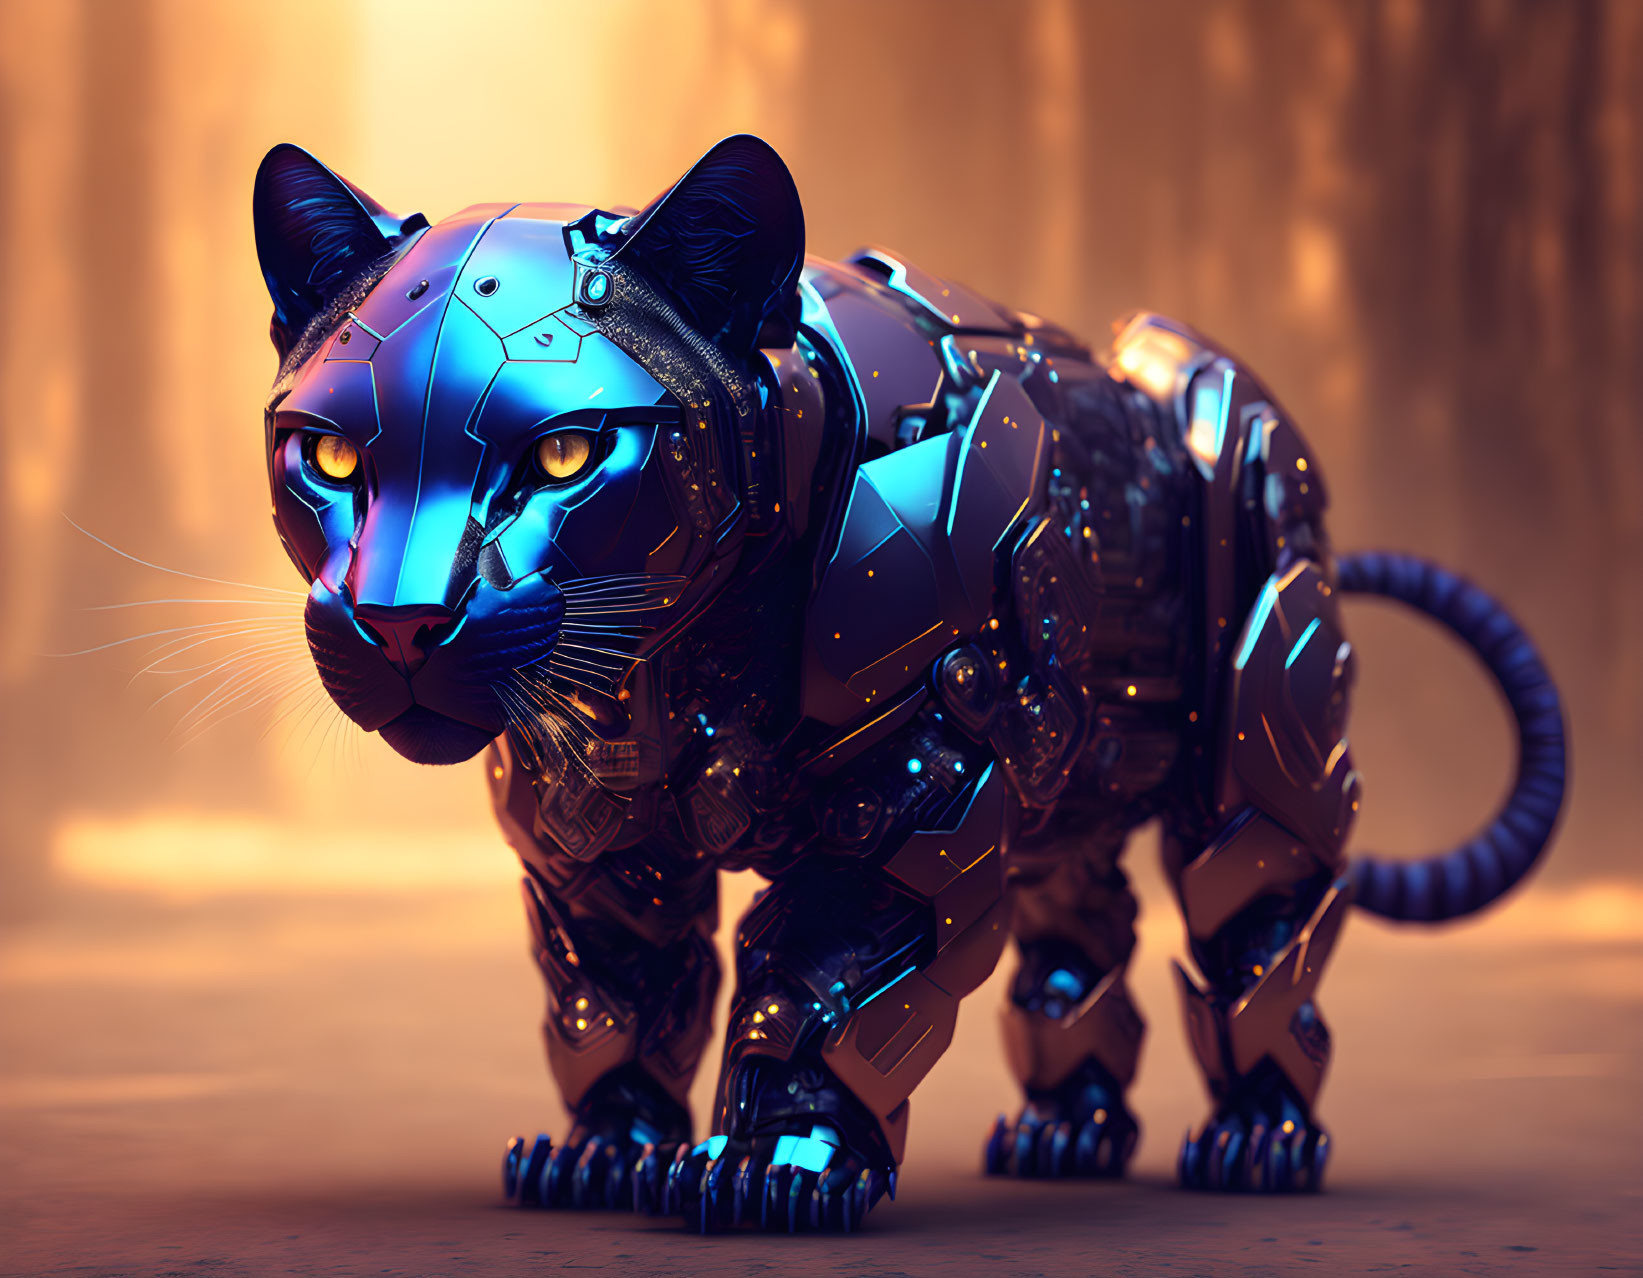 Futuristic blue and black robotic panther in amber-lit setting